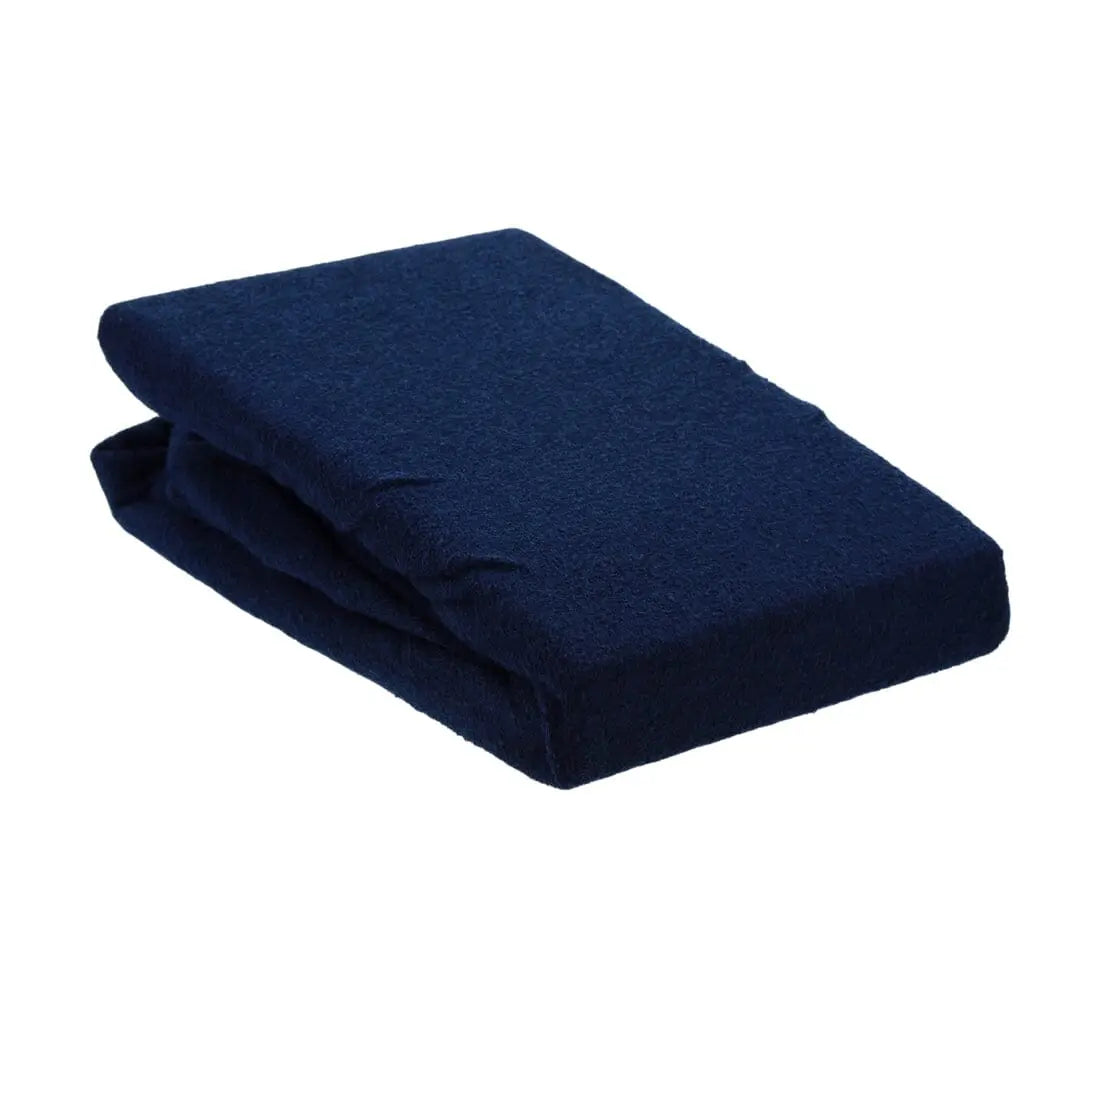 Aztex Classic Value Massage Couch Cover Navy With Face Hole 